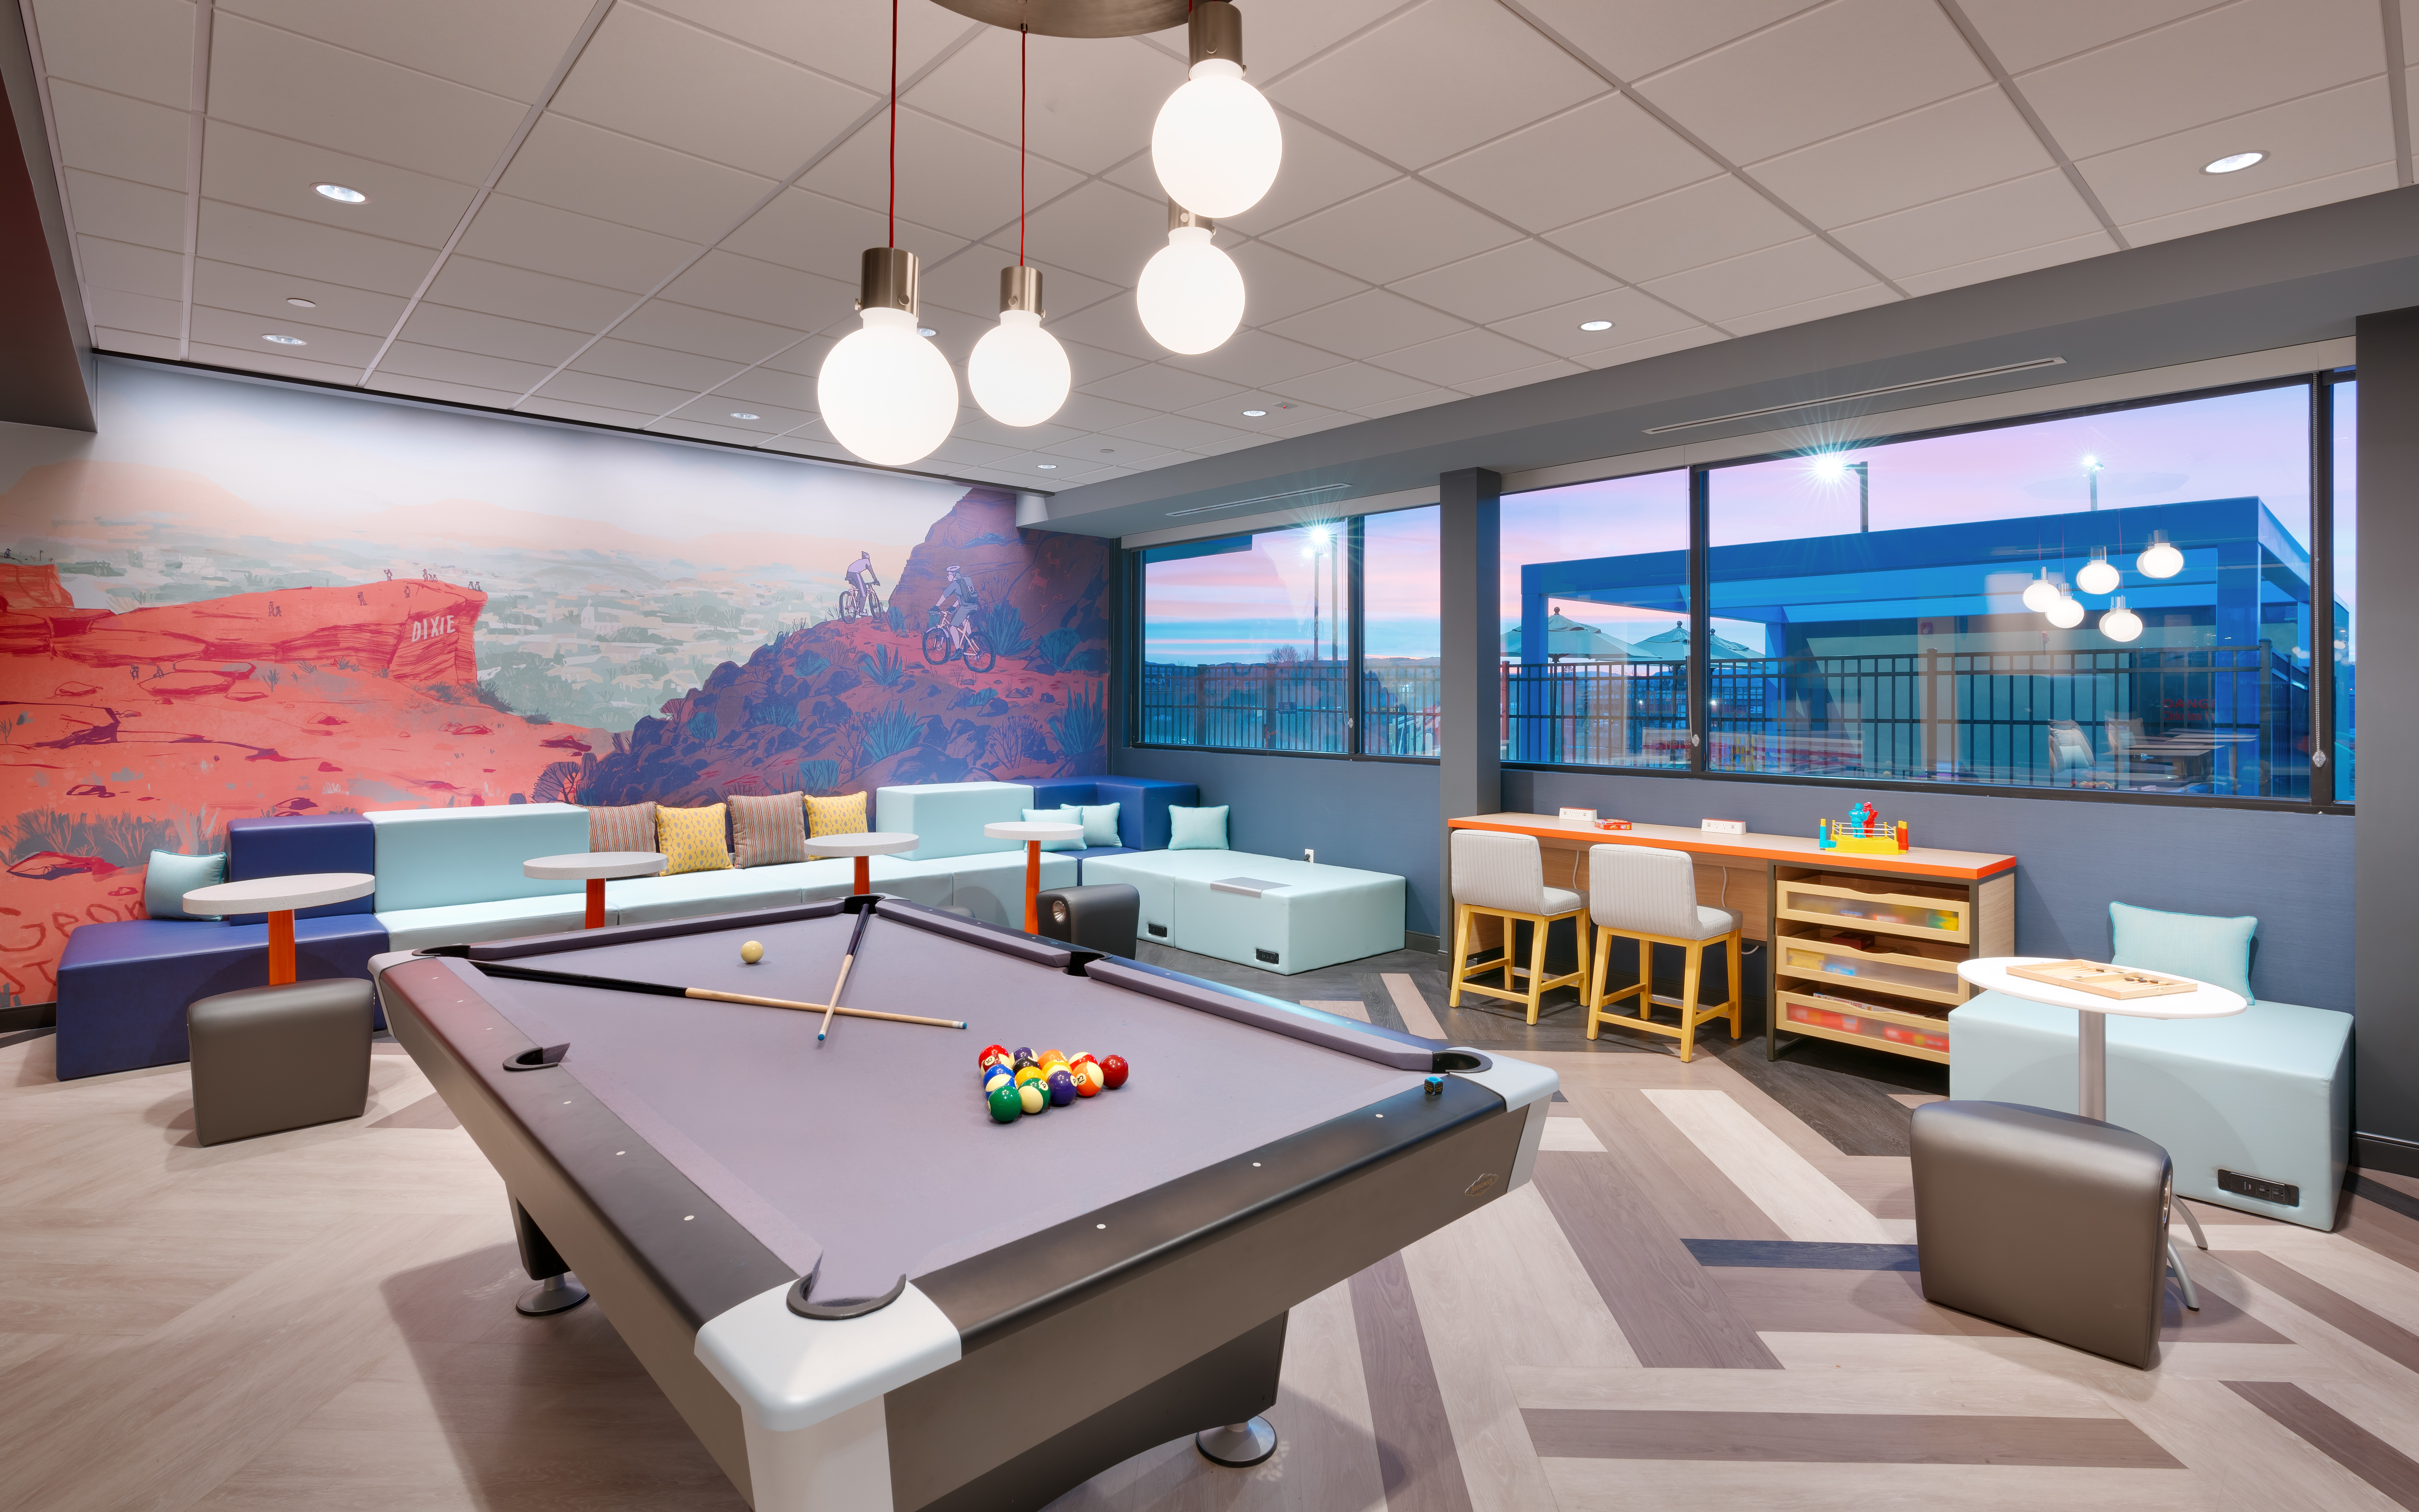 Game Room with Pool Table and Lounge Seating